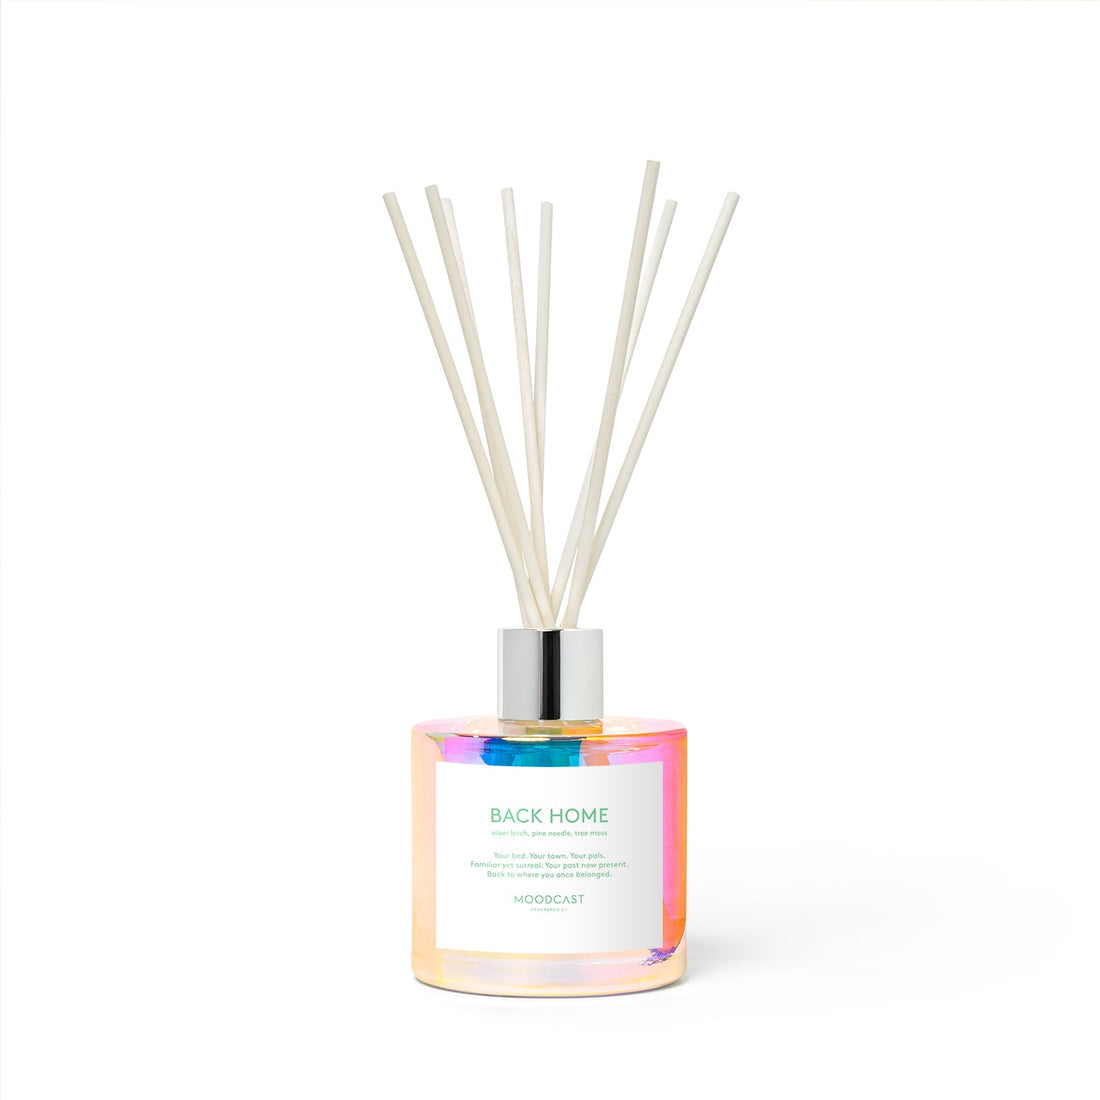 Back Home - Vibes Collection (Iridescent) - 3.4fl oz/100ml Glass Reed Diffuser - Key Notes: Silver Birch, Pine Needle, Tree Moss